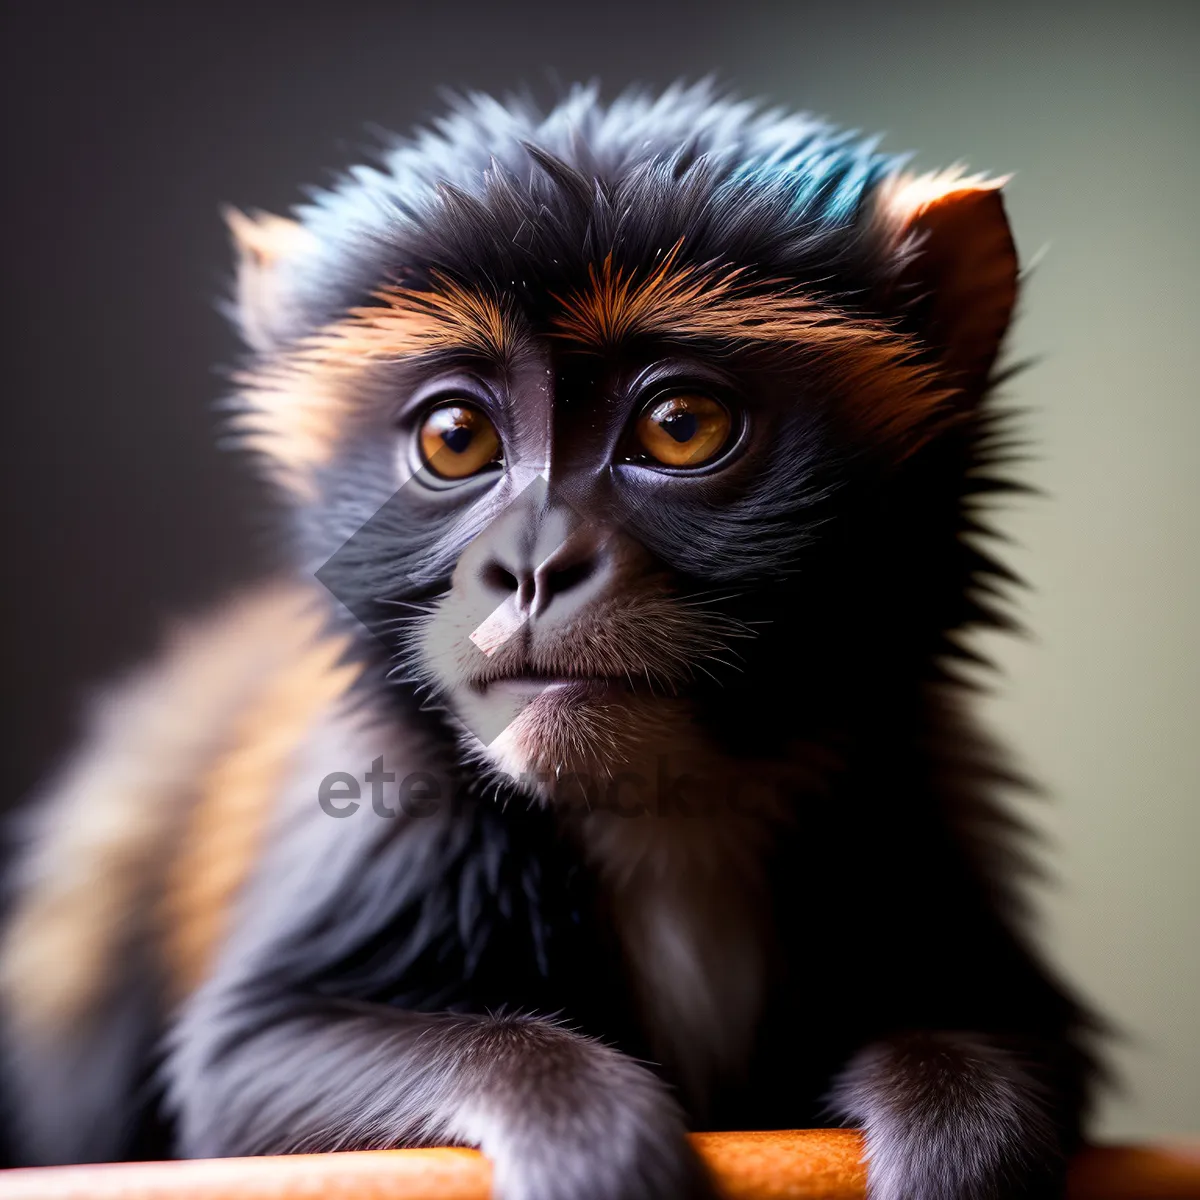 Picture of Playful Primate with Piercing Eyes